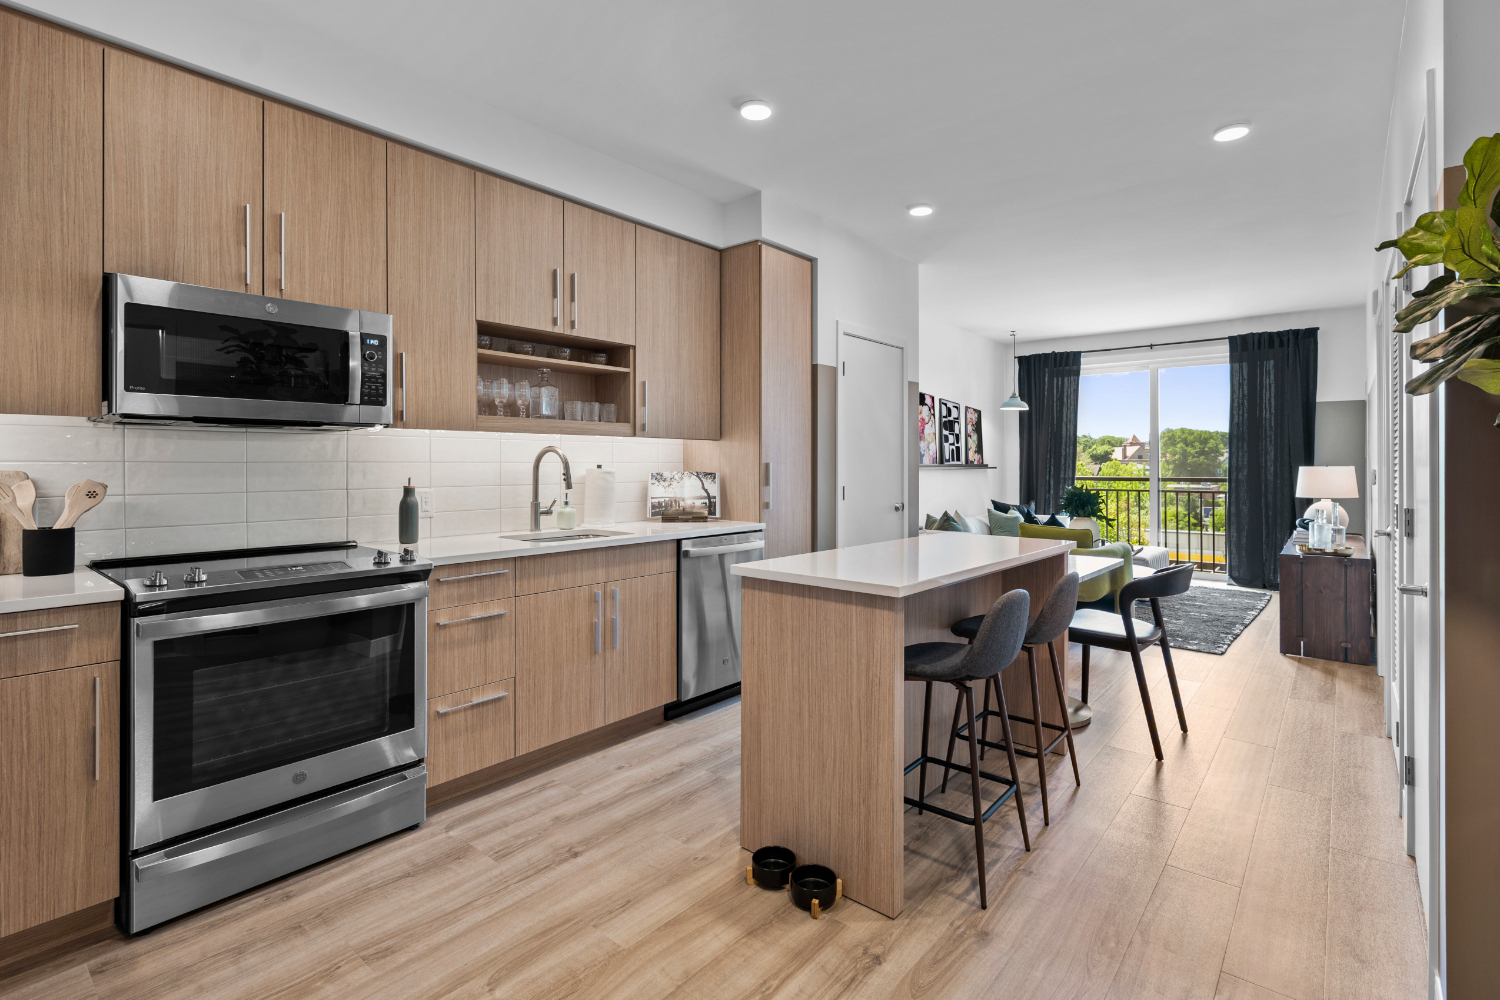 Alder at Allston Yards : Quartz countertops lay the foundation for an extraordinary culinary experience. 	